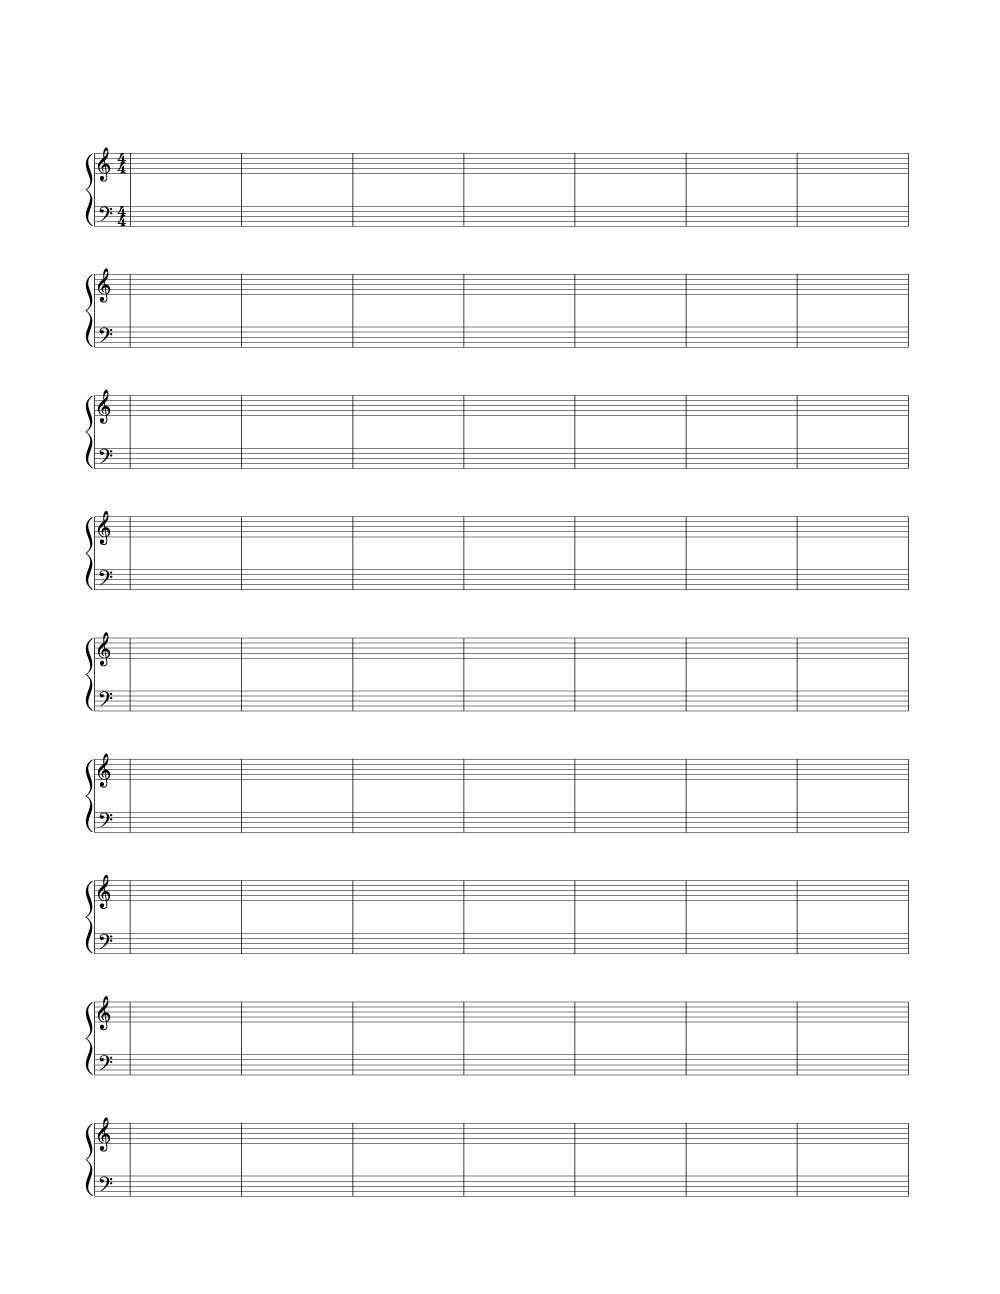 4/4 Time Signature Double Bar Blank Sheet Music | Woo! Jr For Blank Sheet Music Template For Word